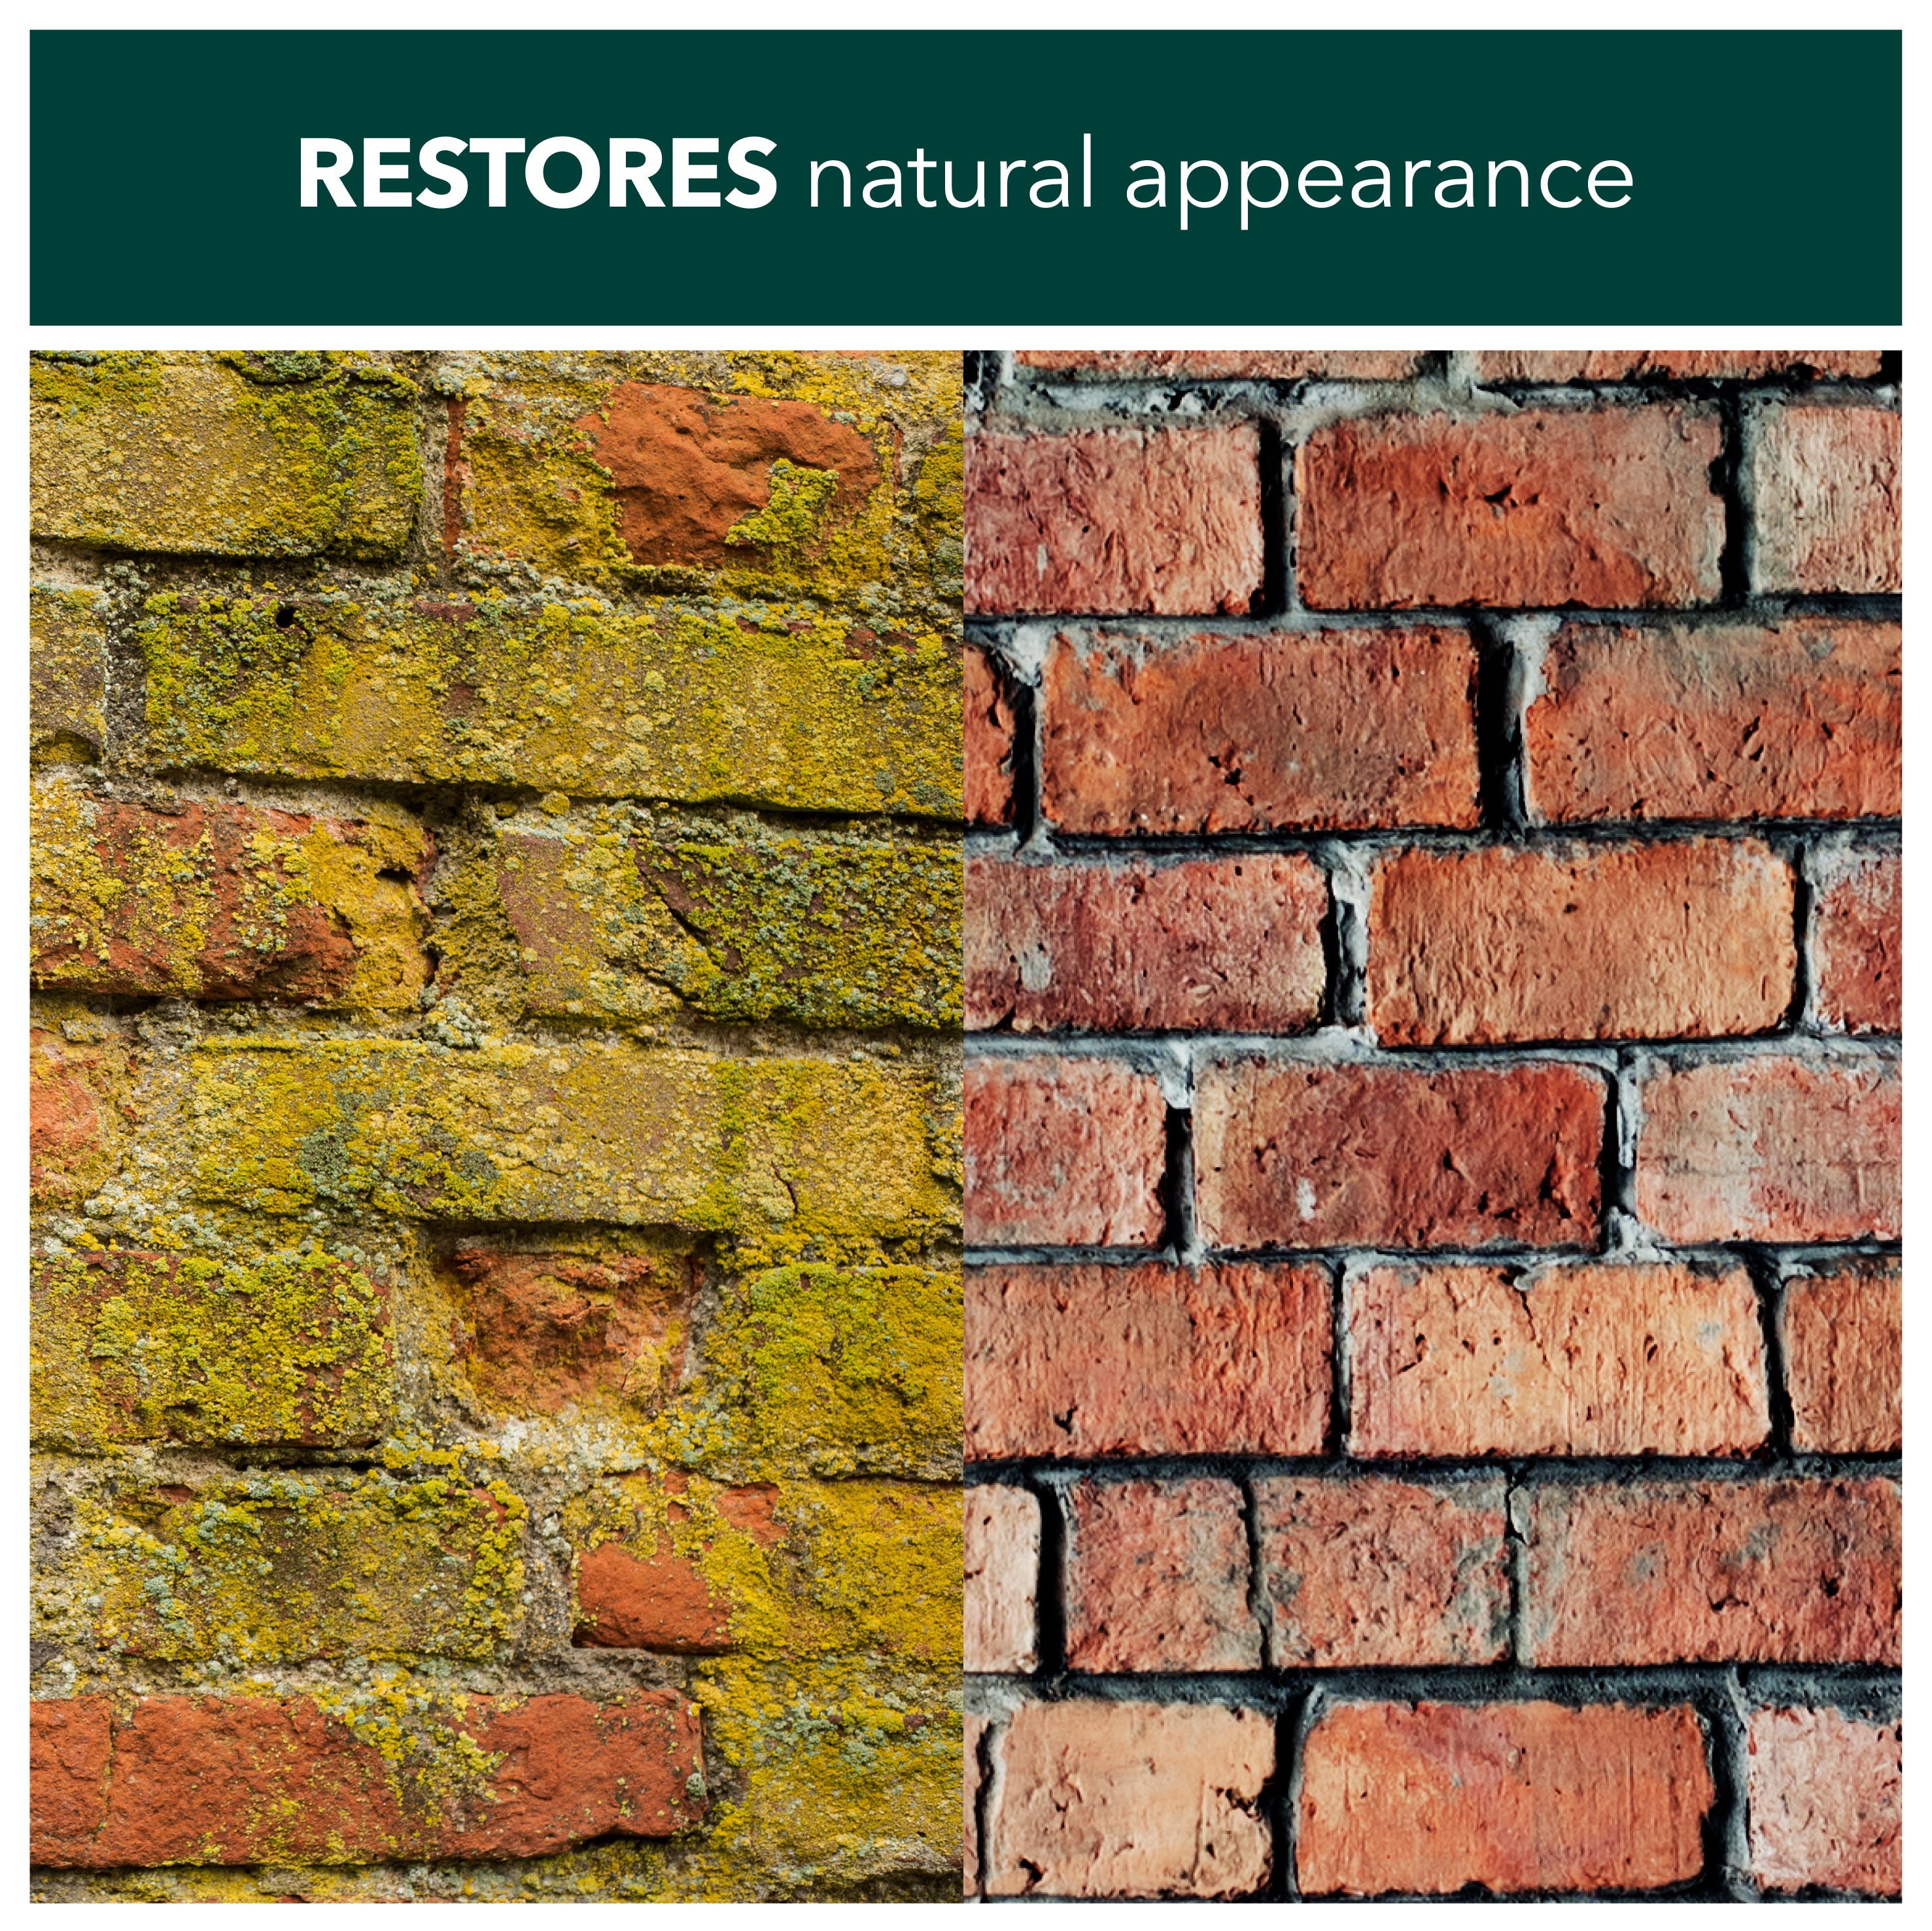 Restores natural appearance